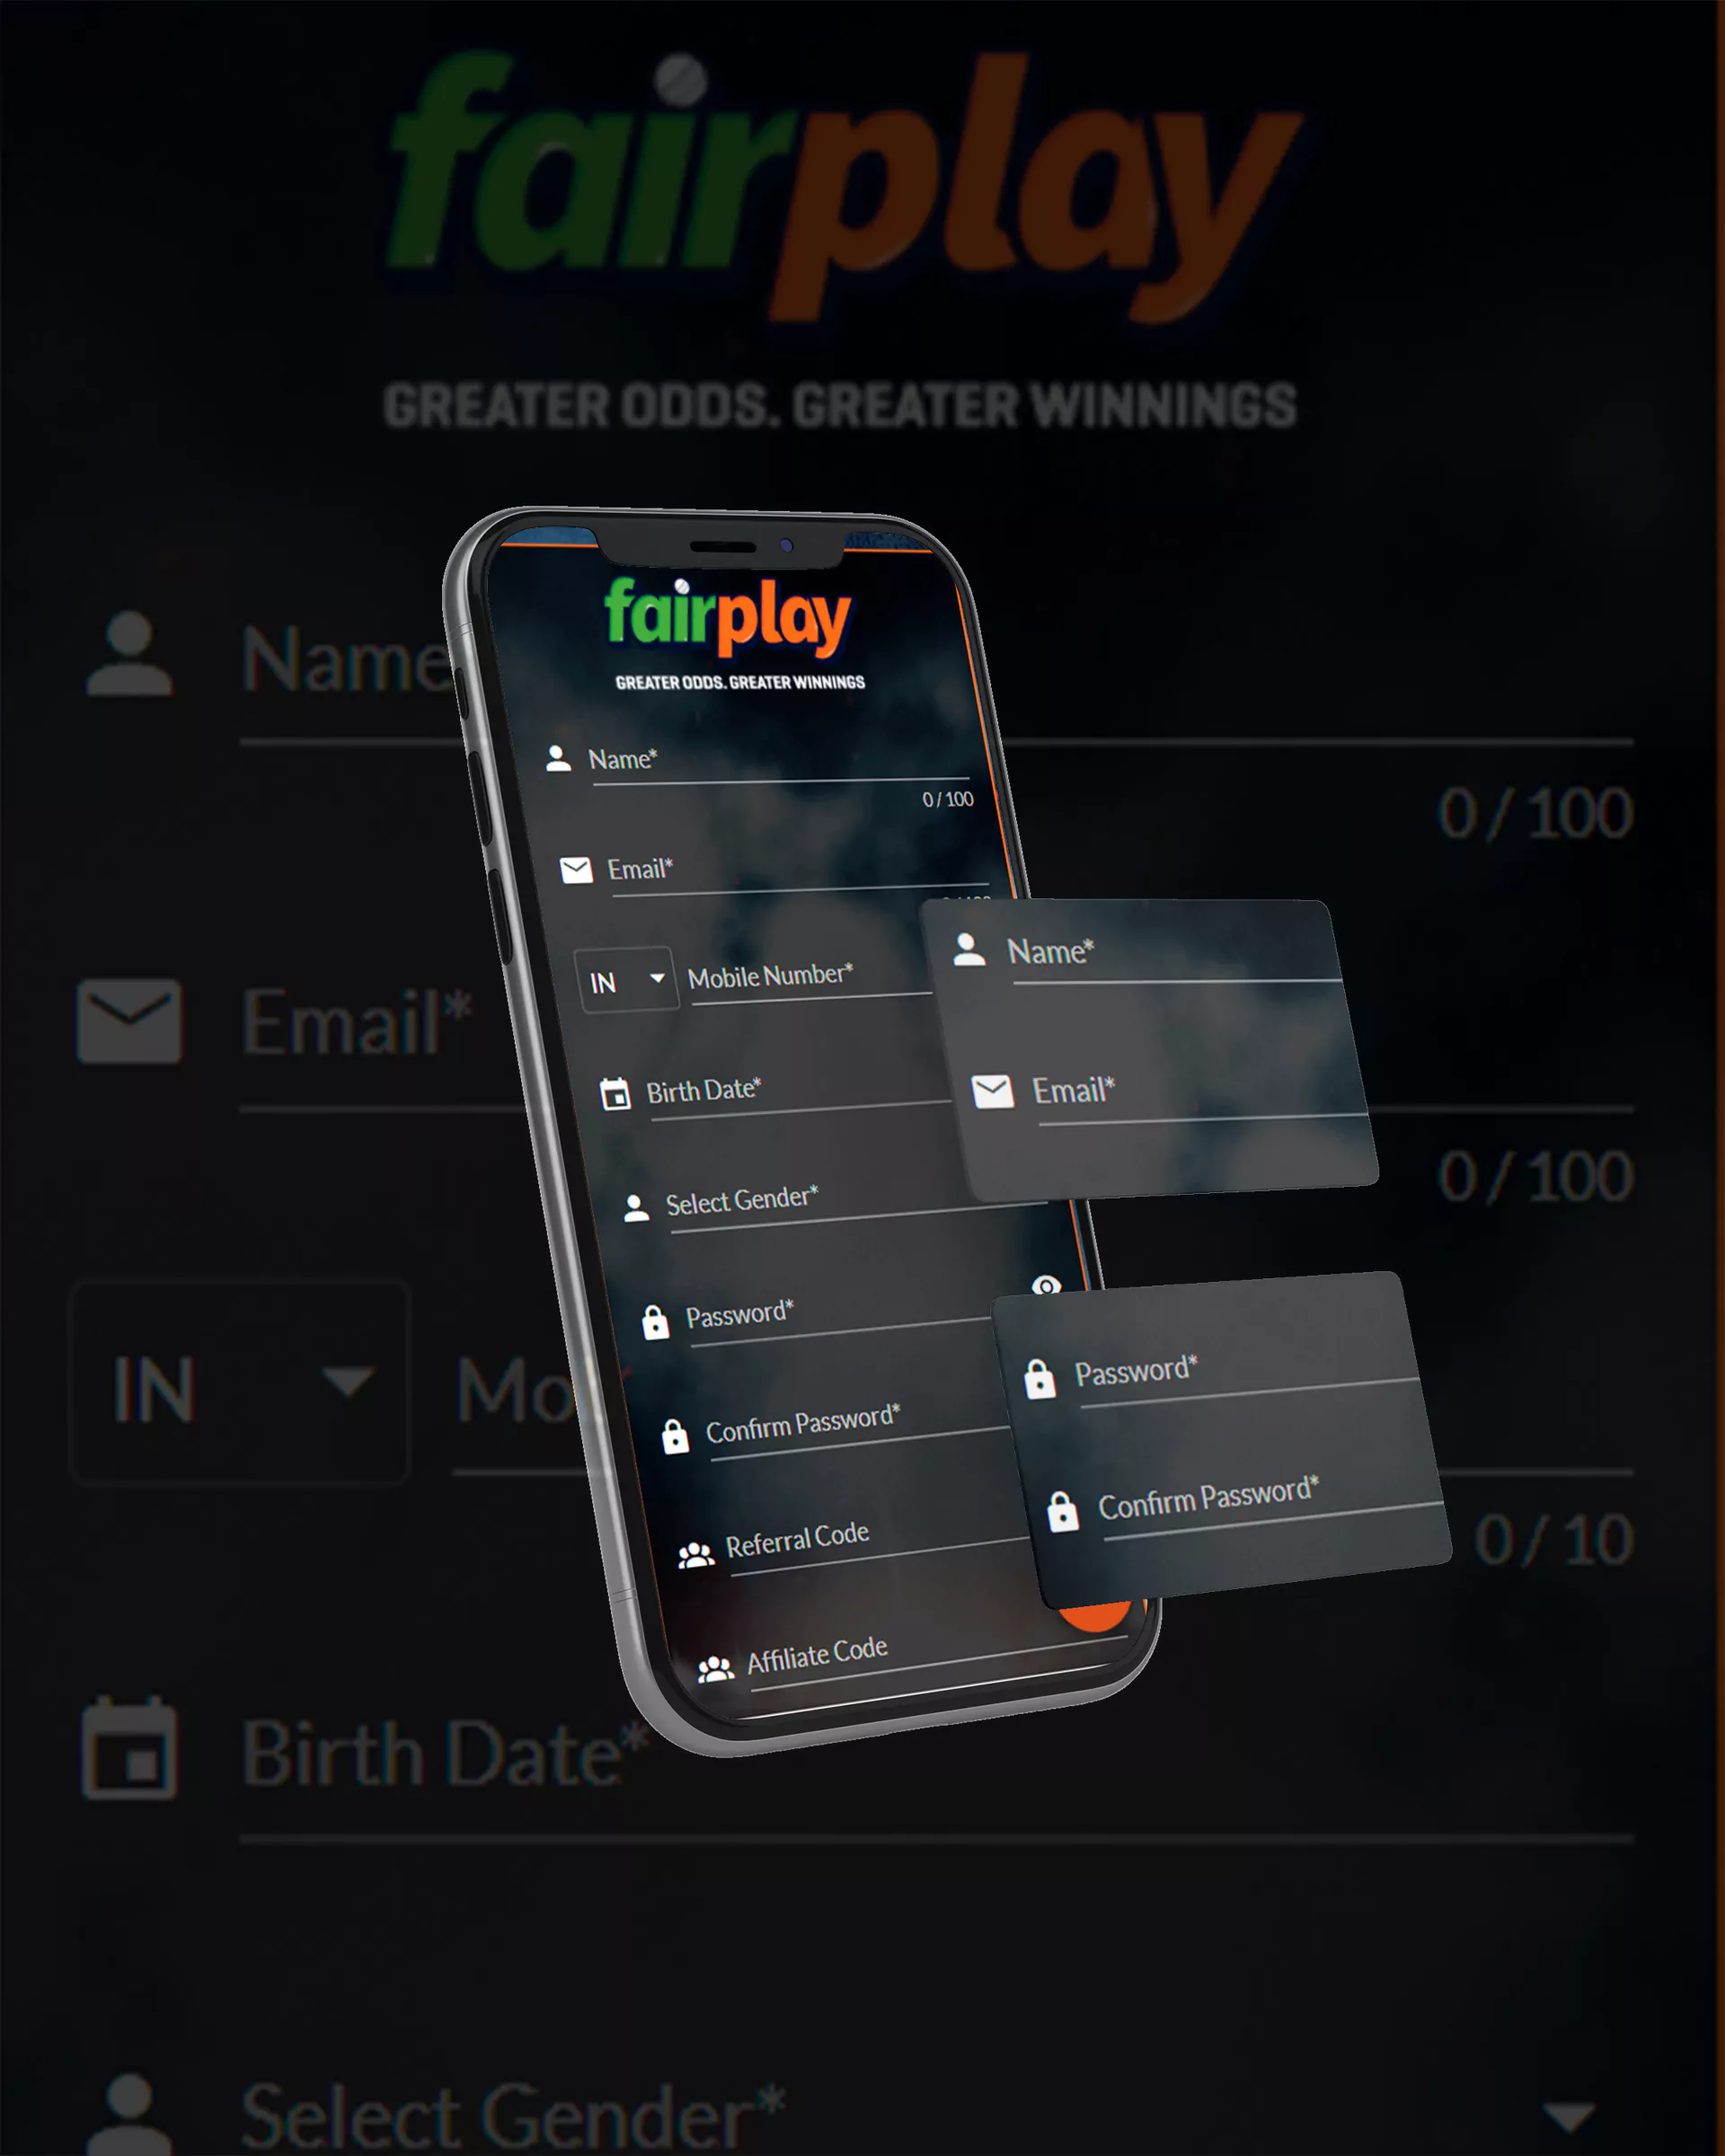 Create a Fairplay account and start betting at Fairplay betting app.